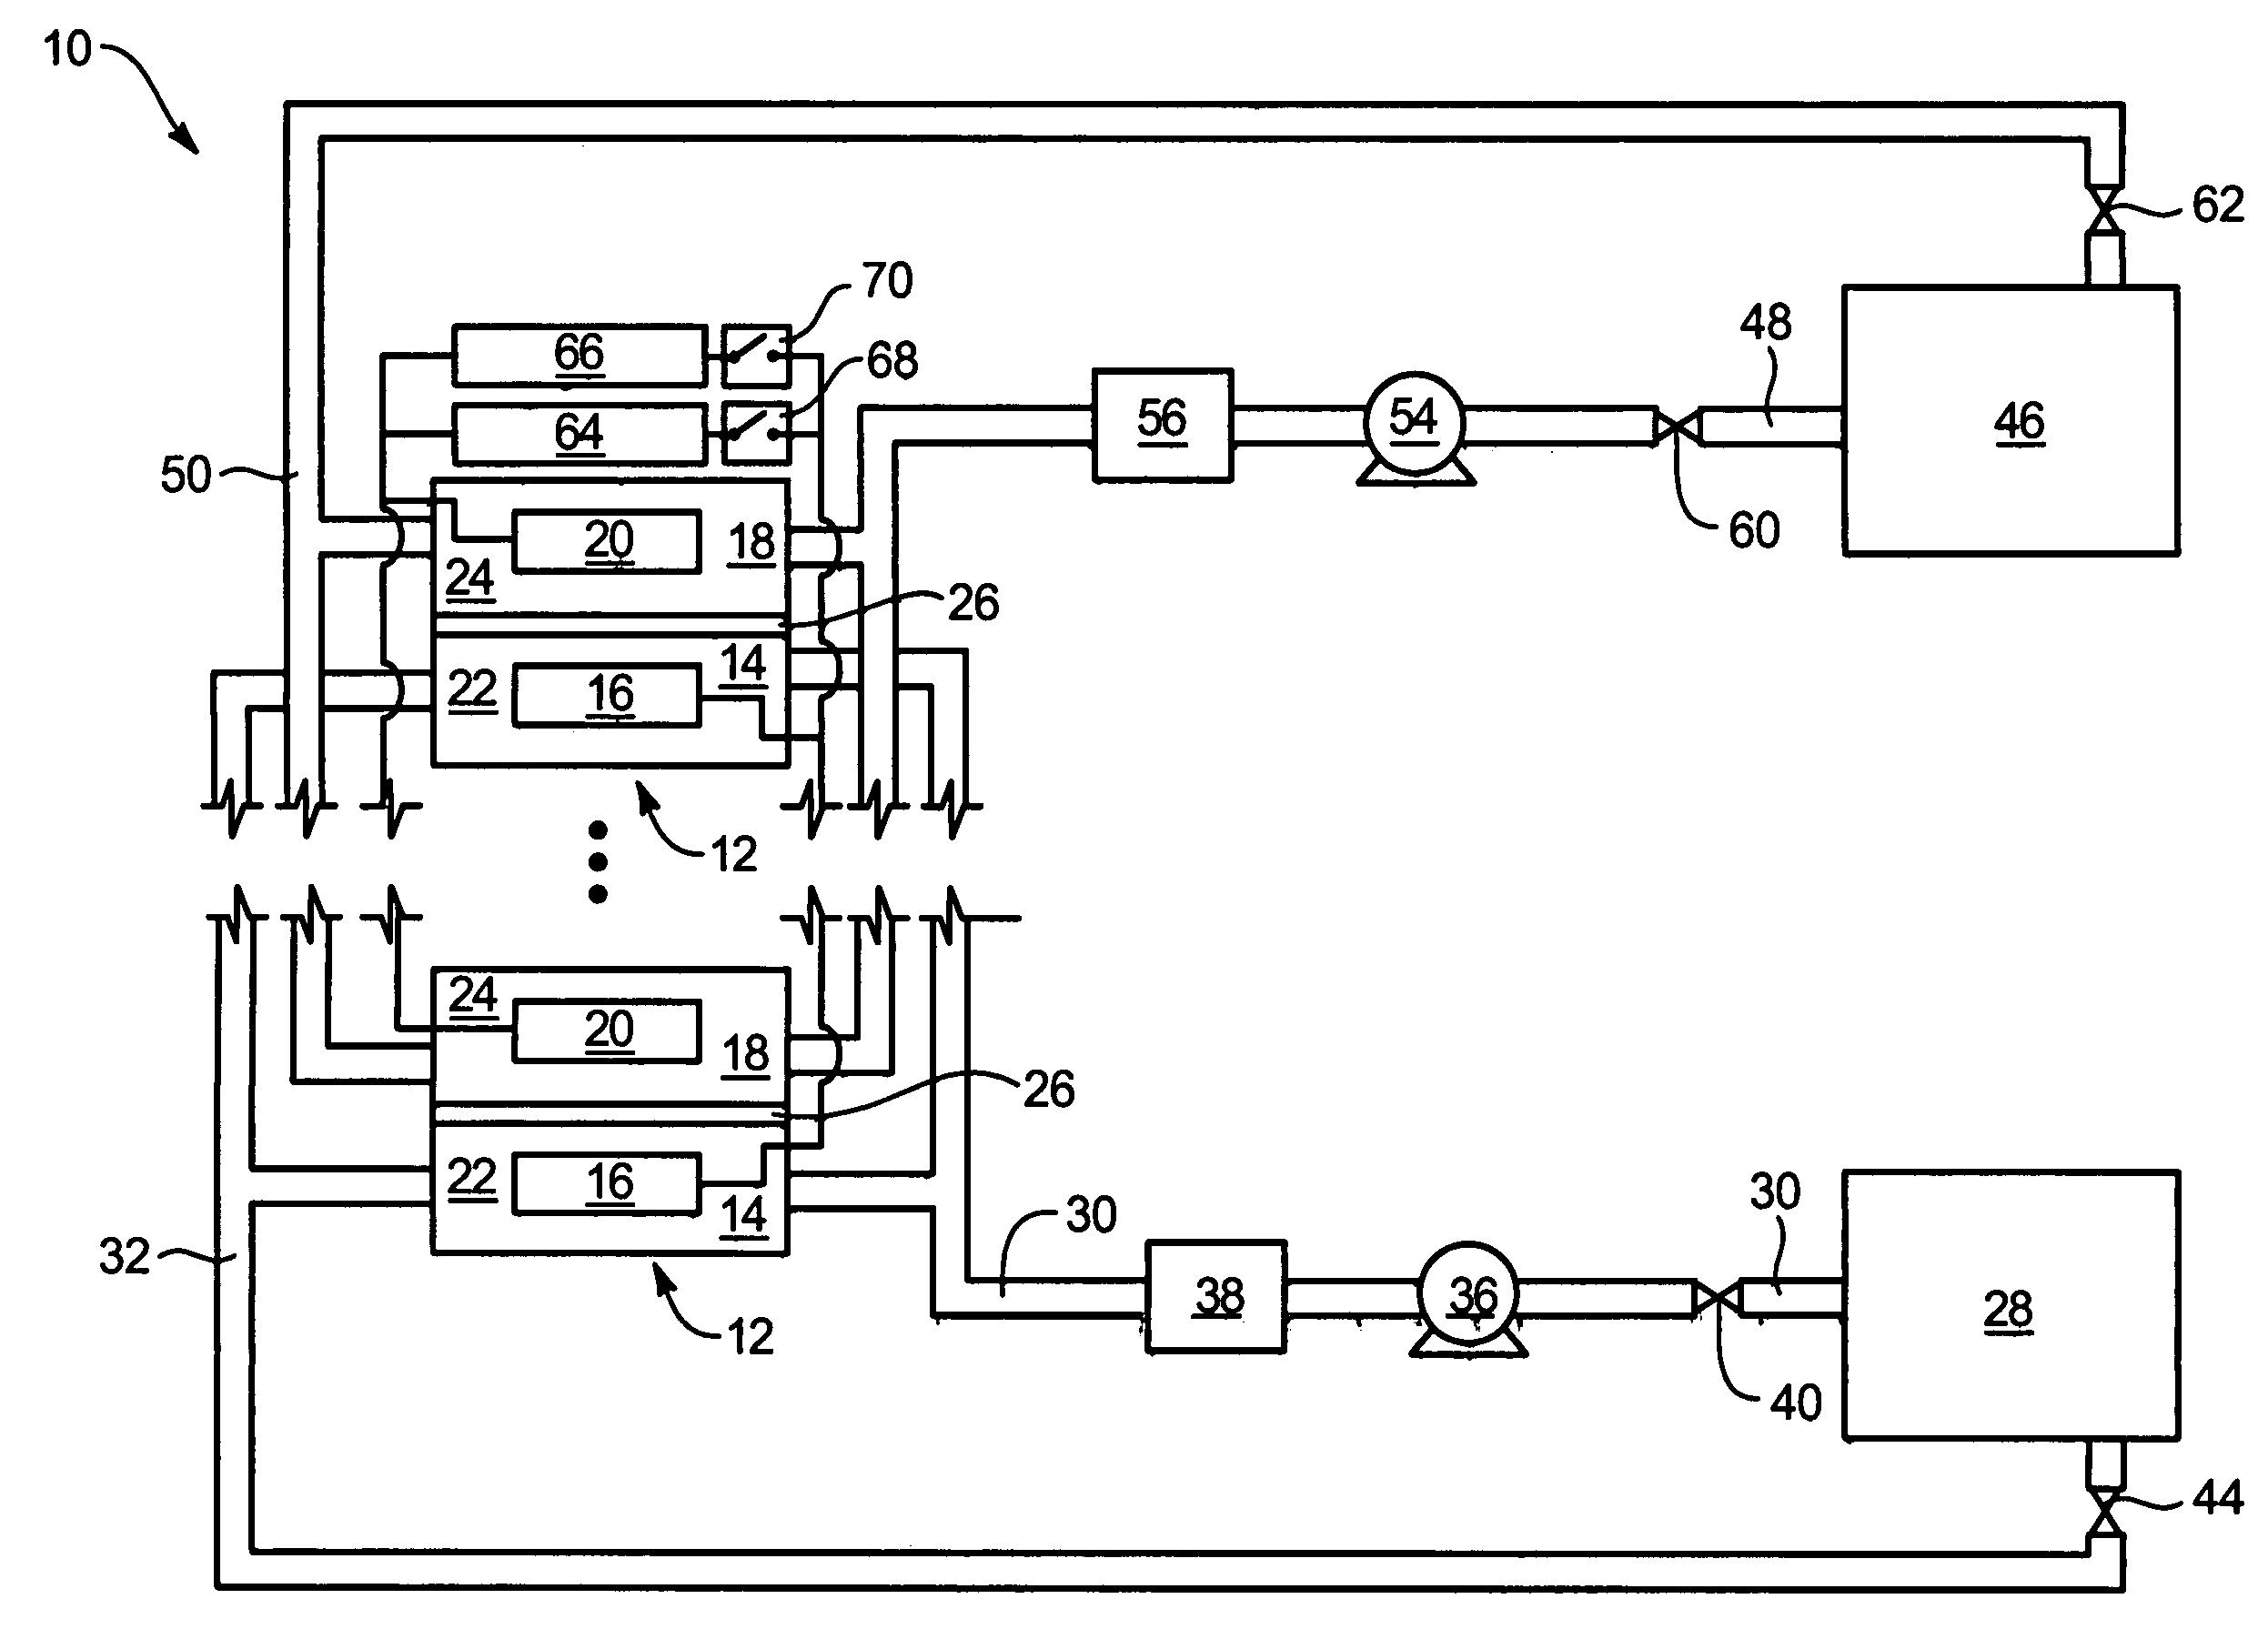 System and method for optimizing efficiency and power output from a vanadium redox battery energy storage system